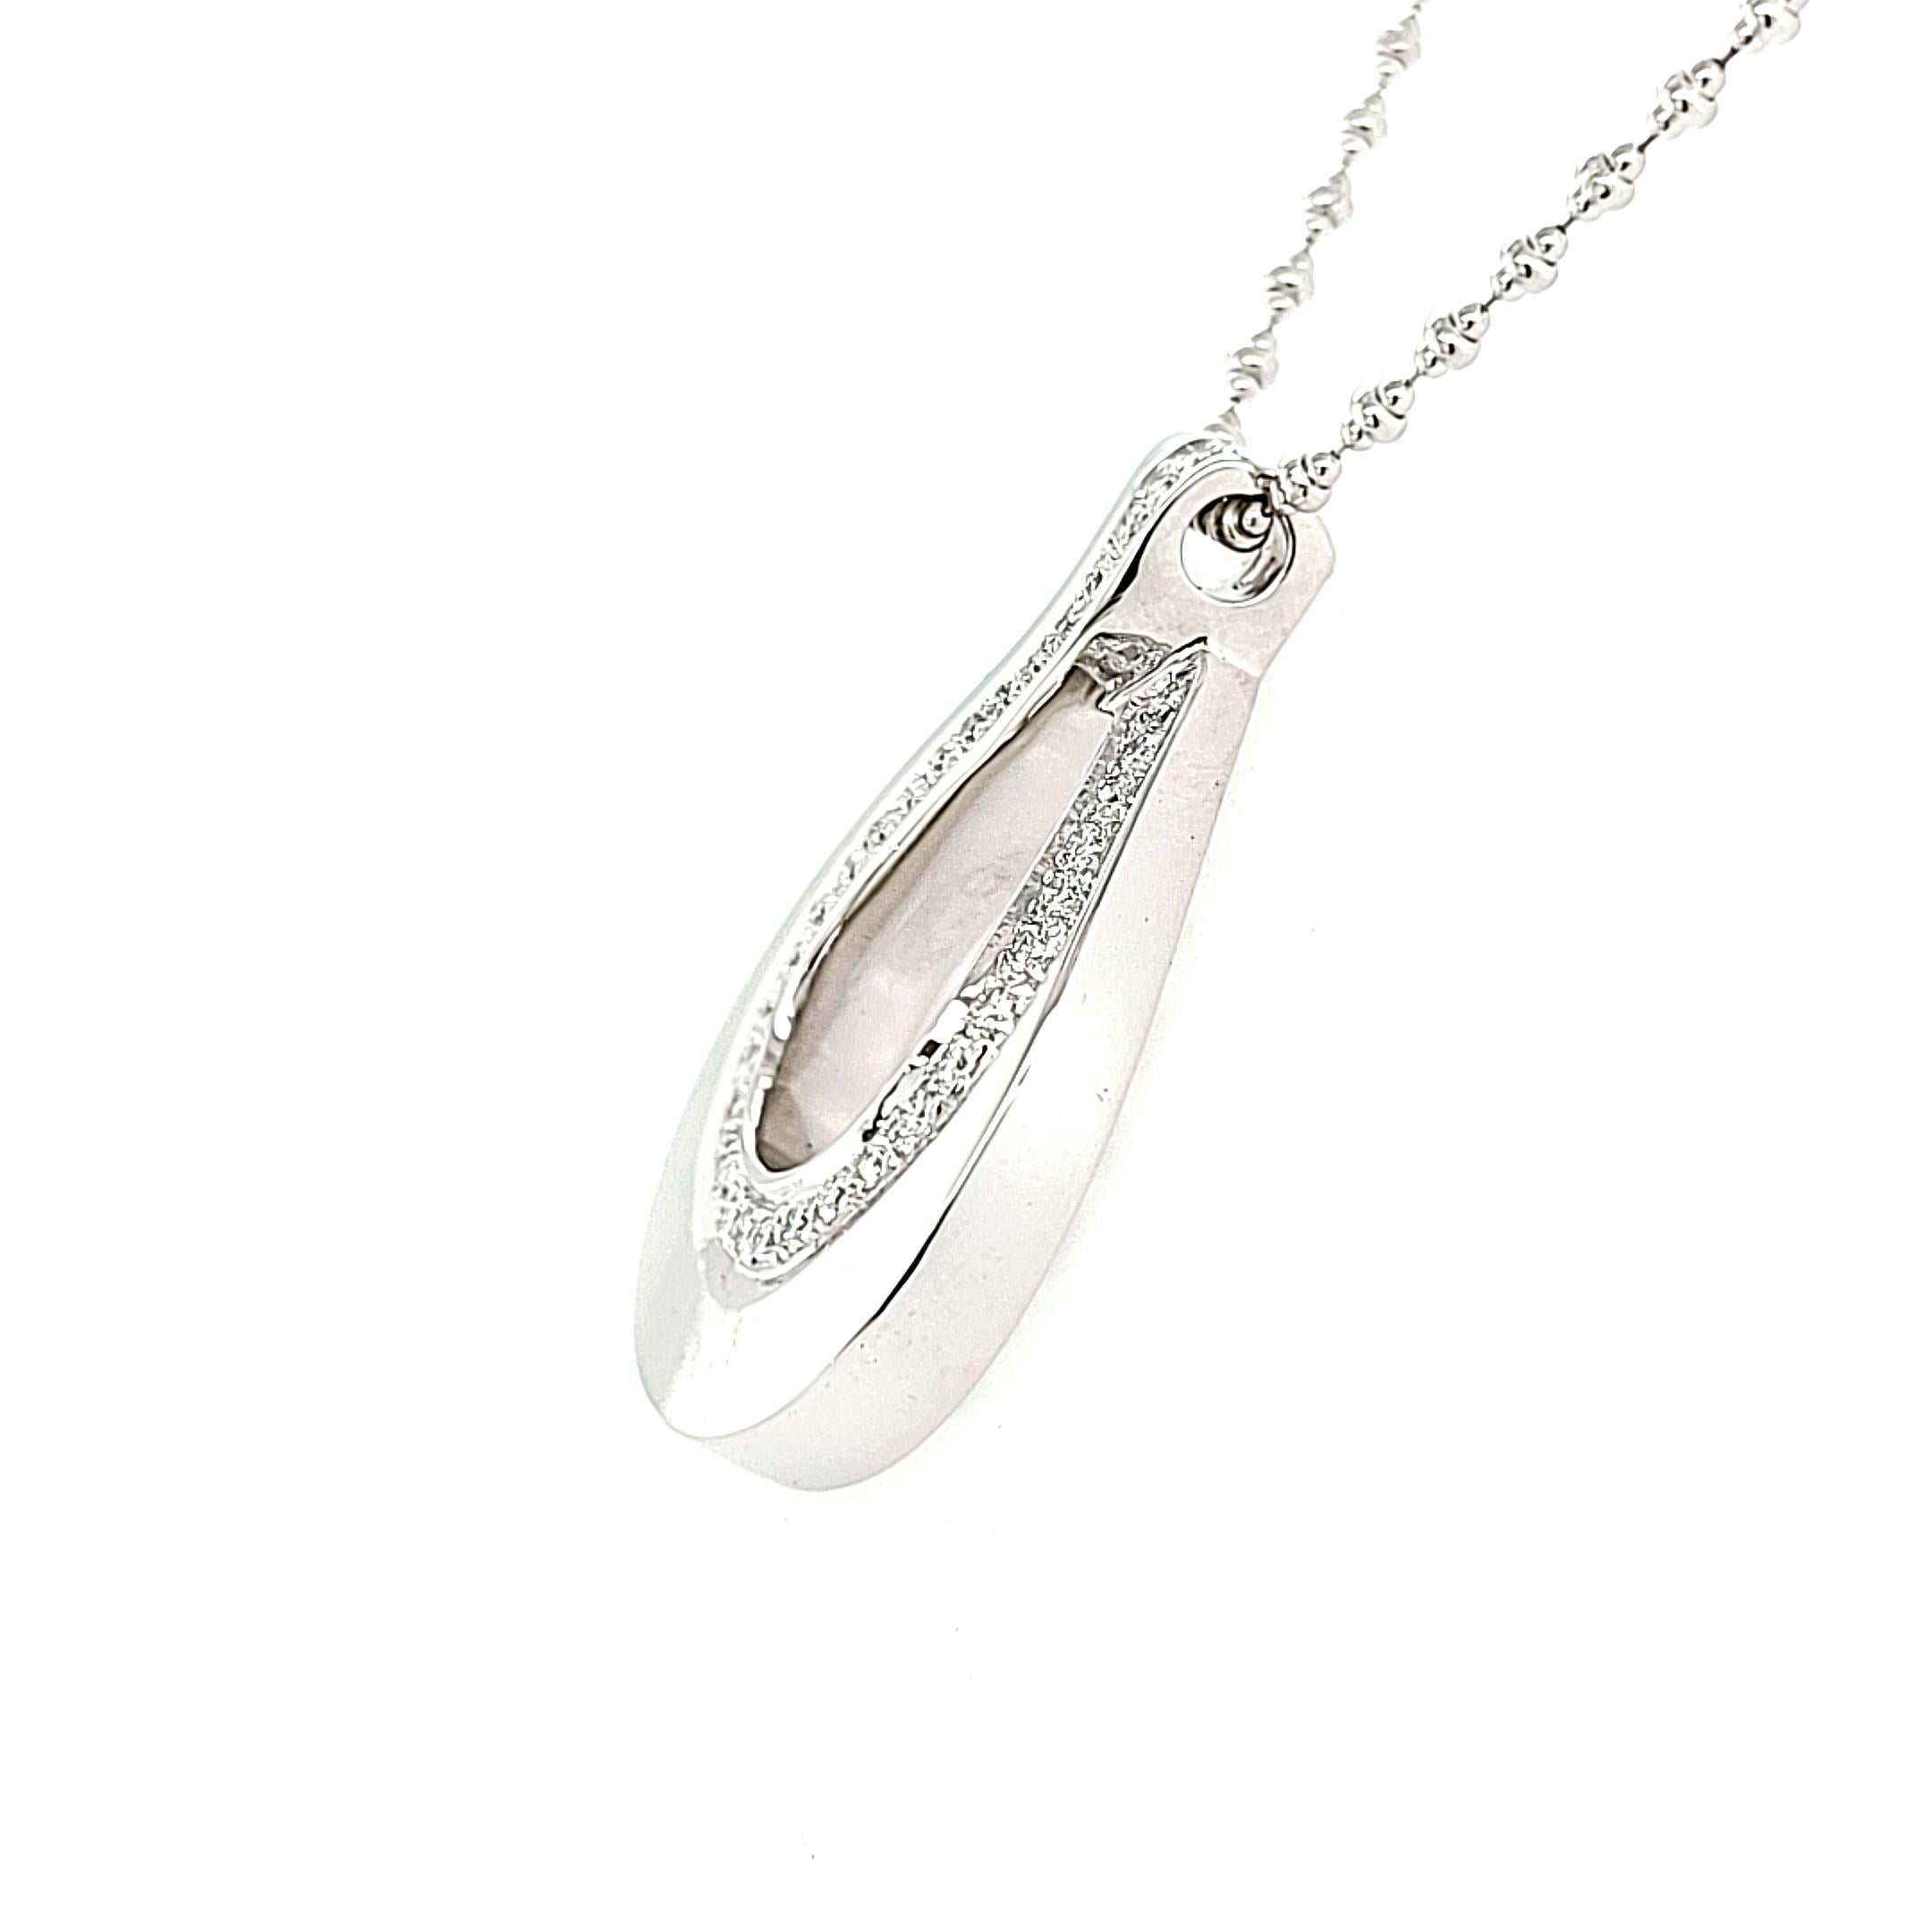 18 Karat White Gold Pear Shaped Pendant Necklace with Diamonds For Sale 1